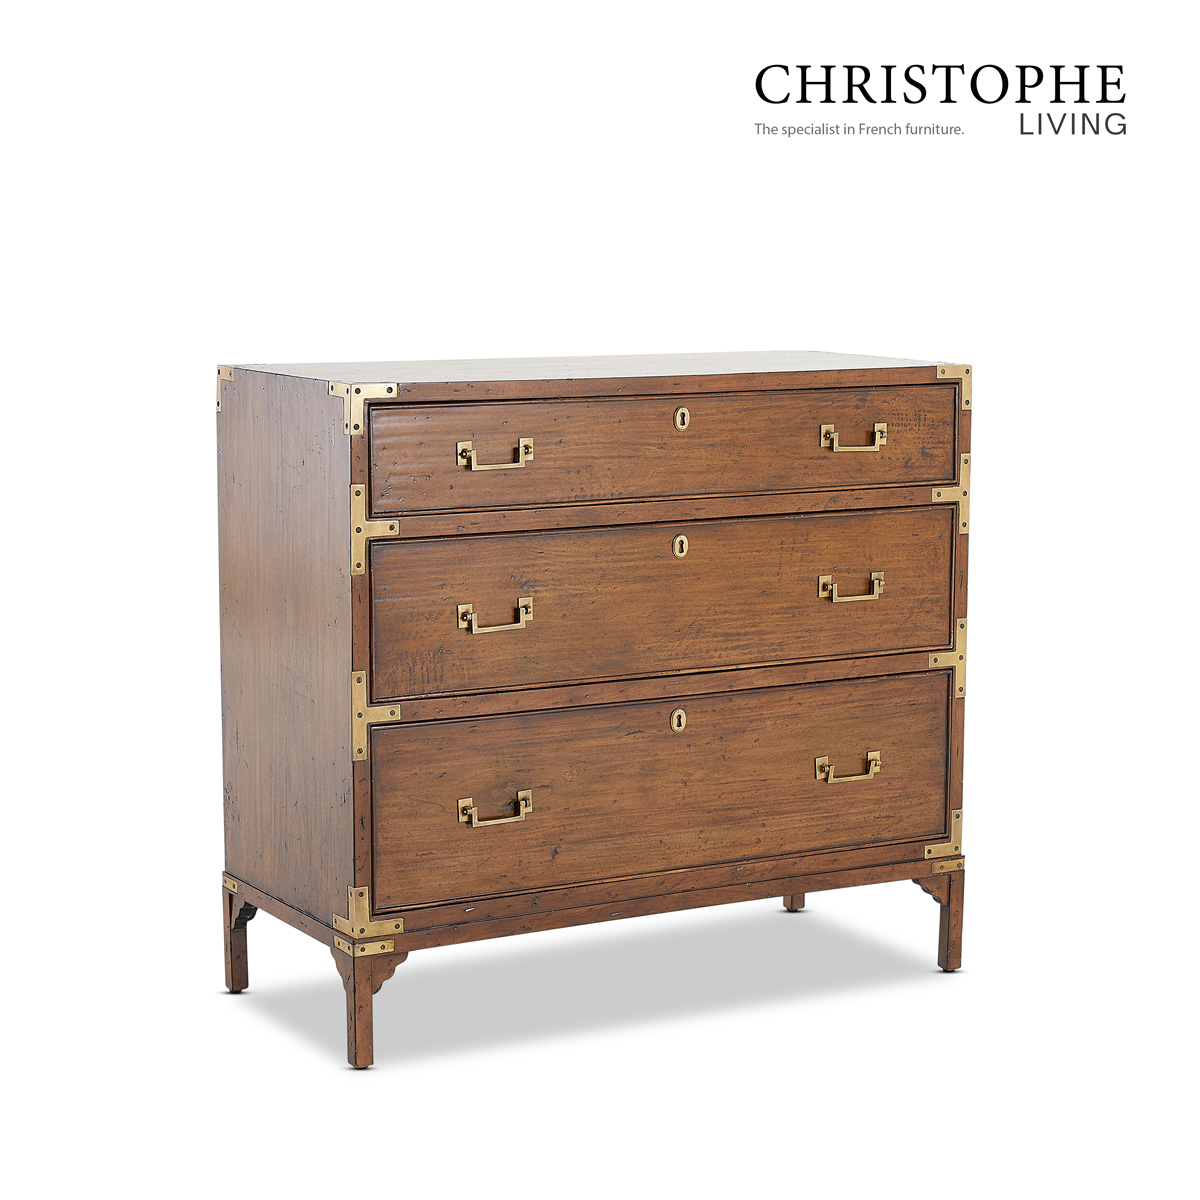 Holland French Provincial Chest of 3 Drawers in Warm Natural Timber Cognac Finish